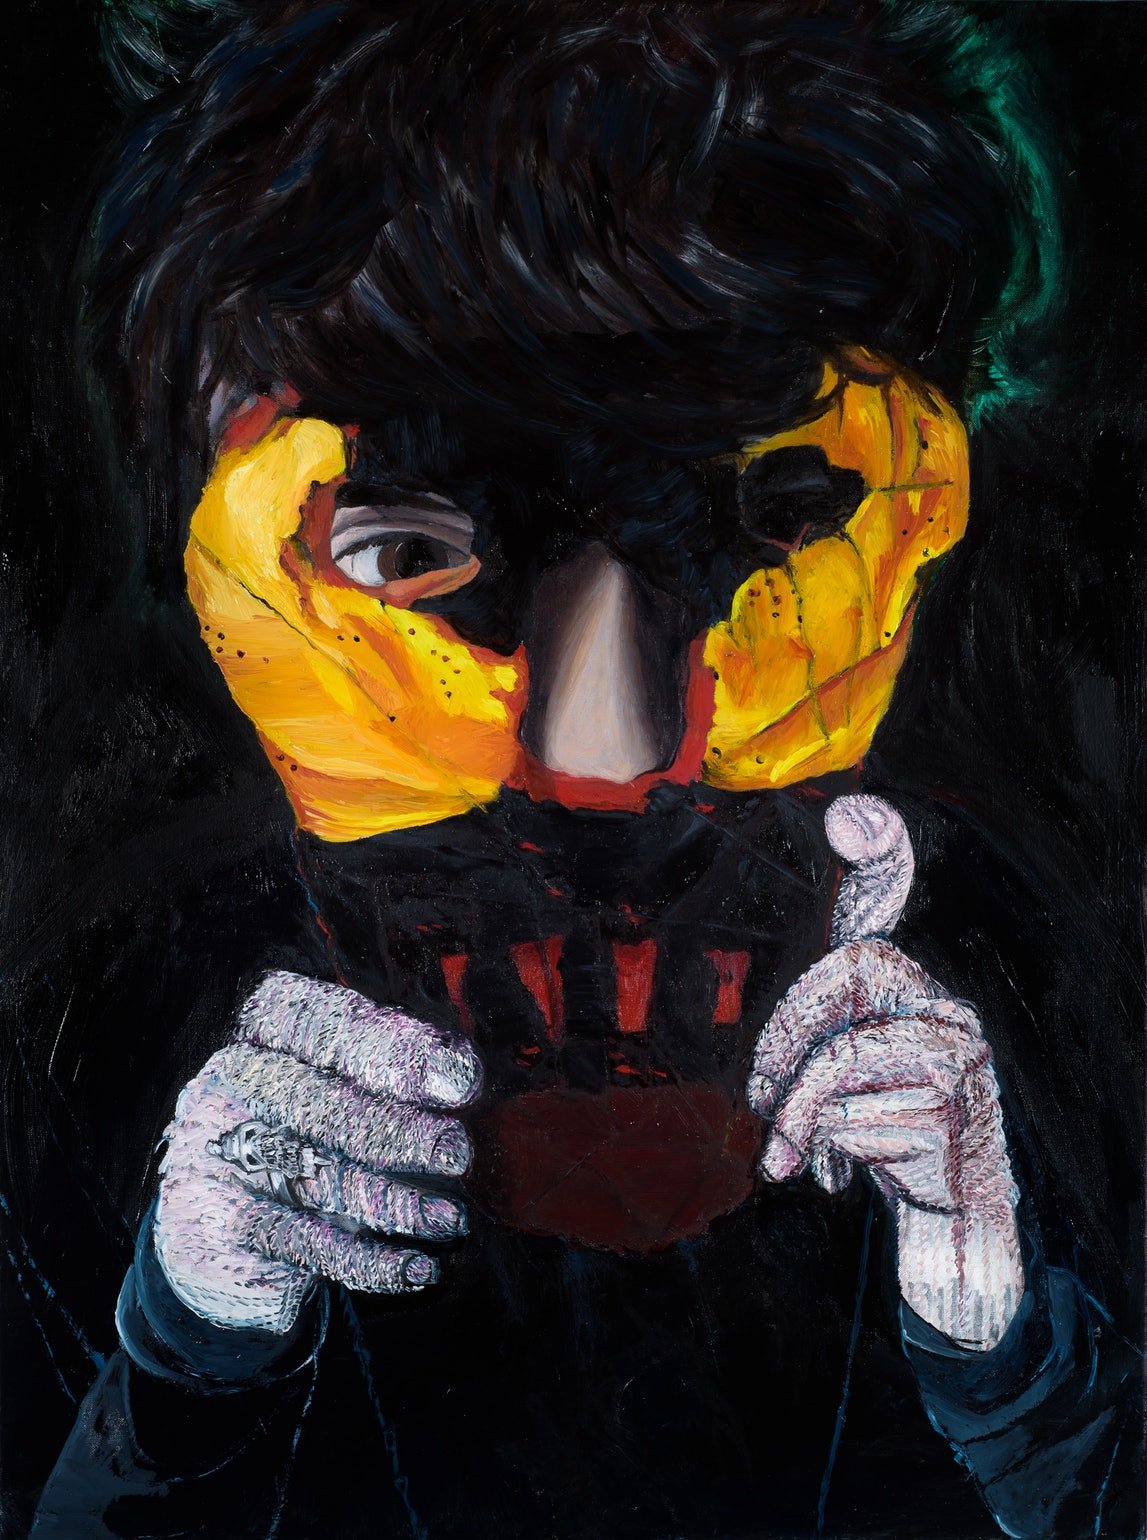 painting of child holding a mask